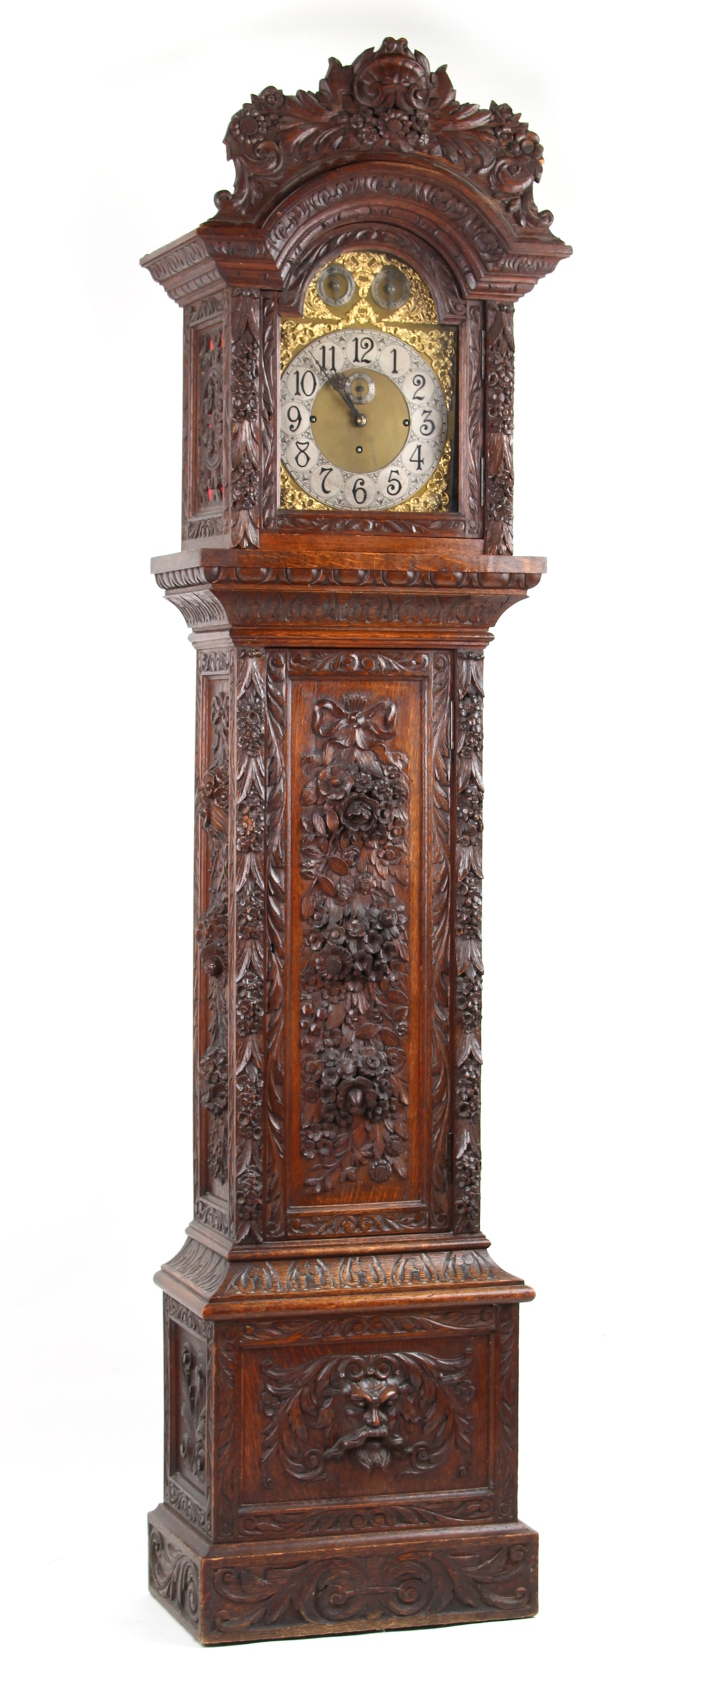 Property of a deceased estate - a late 19th century carved oak longcase clock, the 8-day chiming